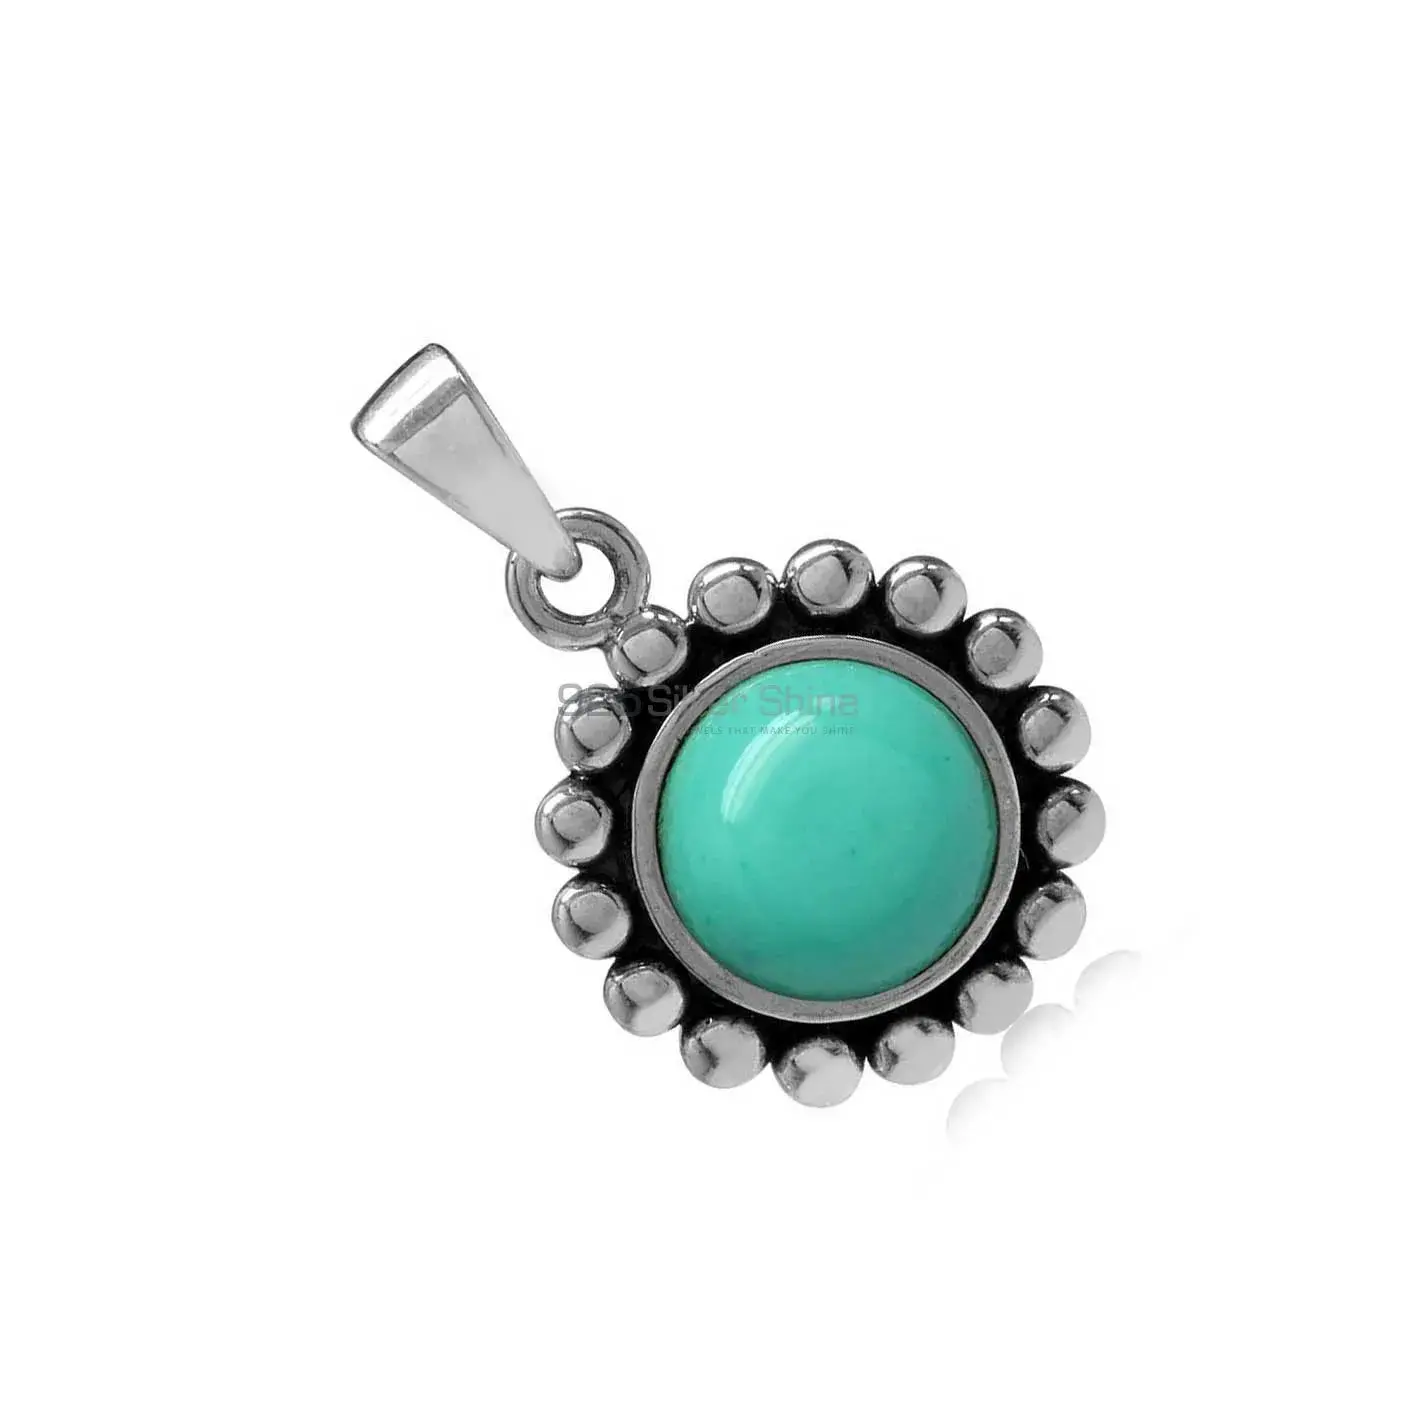 Best Price Solid Sterling Silver Handmade Pendants In Turquoise Gemstone Jewelry 925SP02-4_2